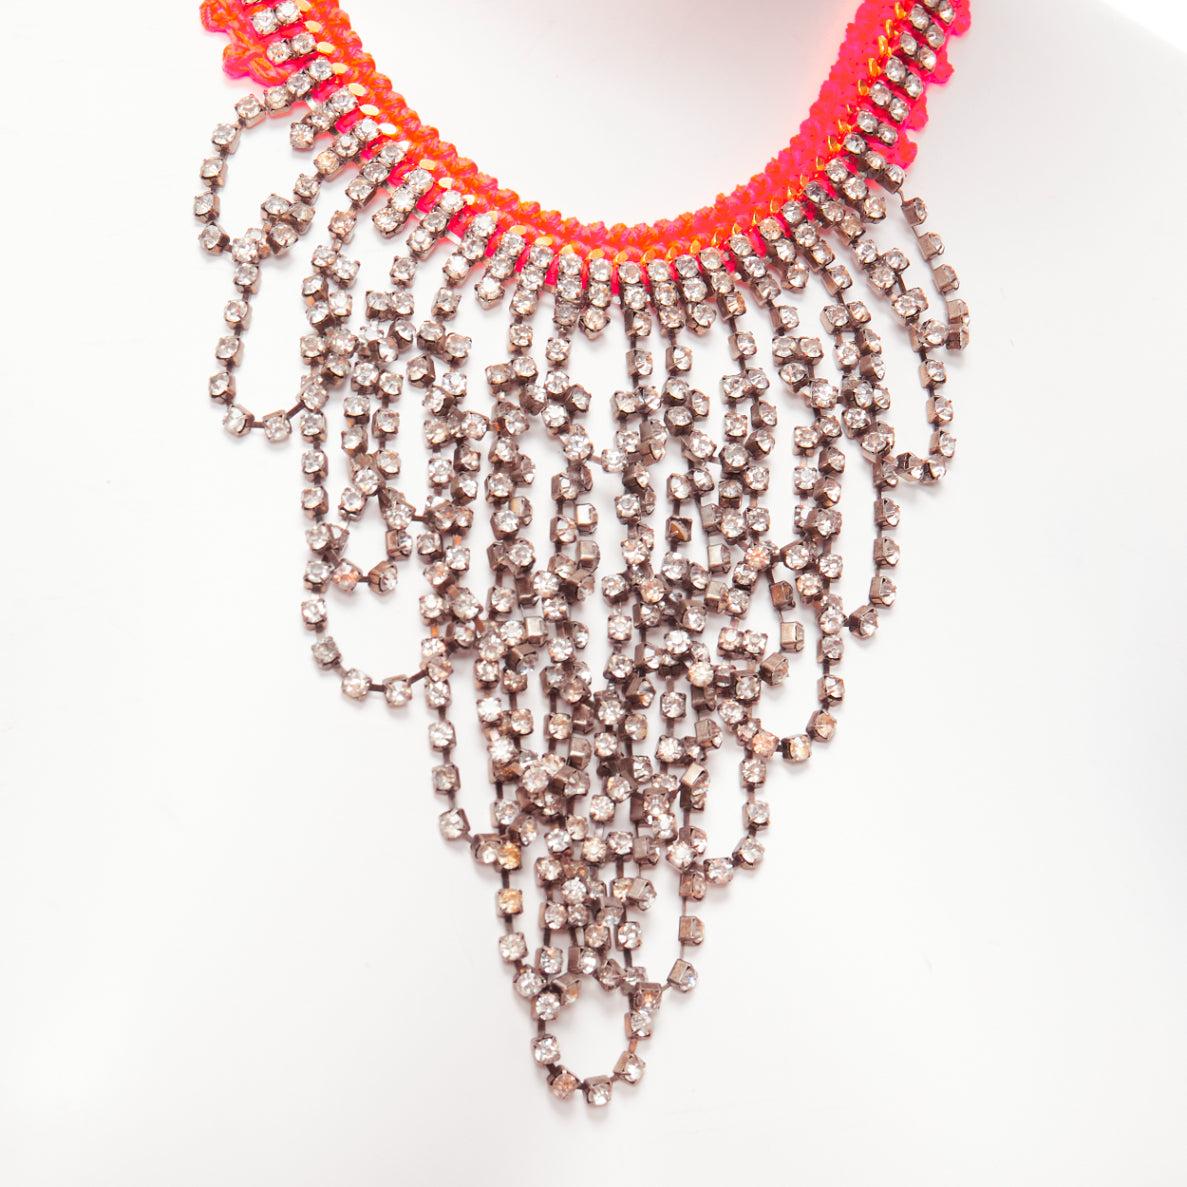 VANESSA ARIZAGA neon orange rope clear crystal chandelier short necklace For Sale 2